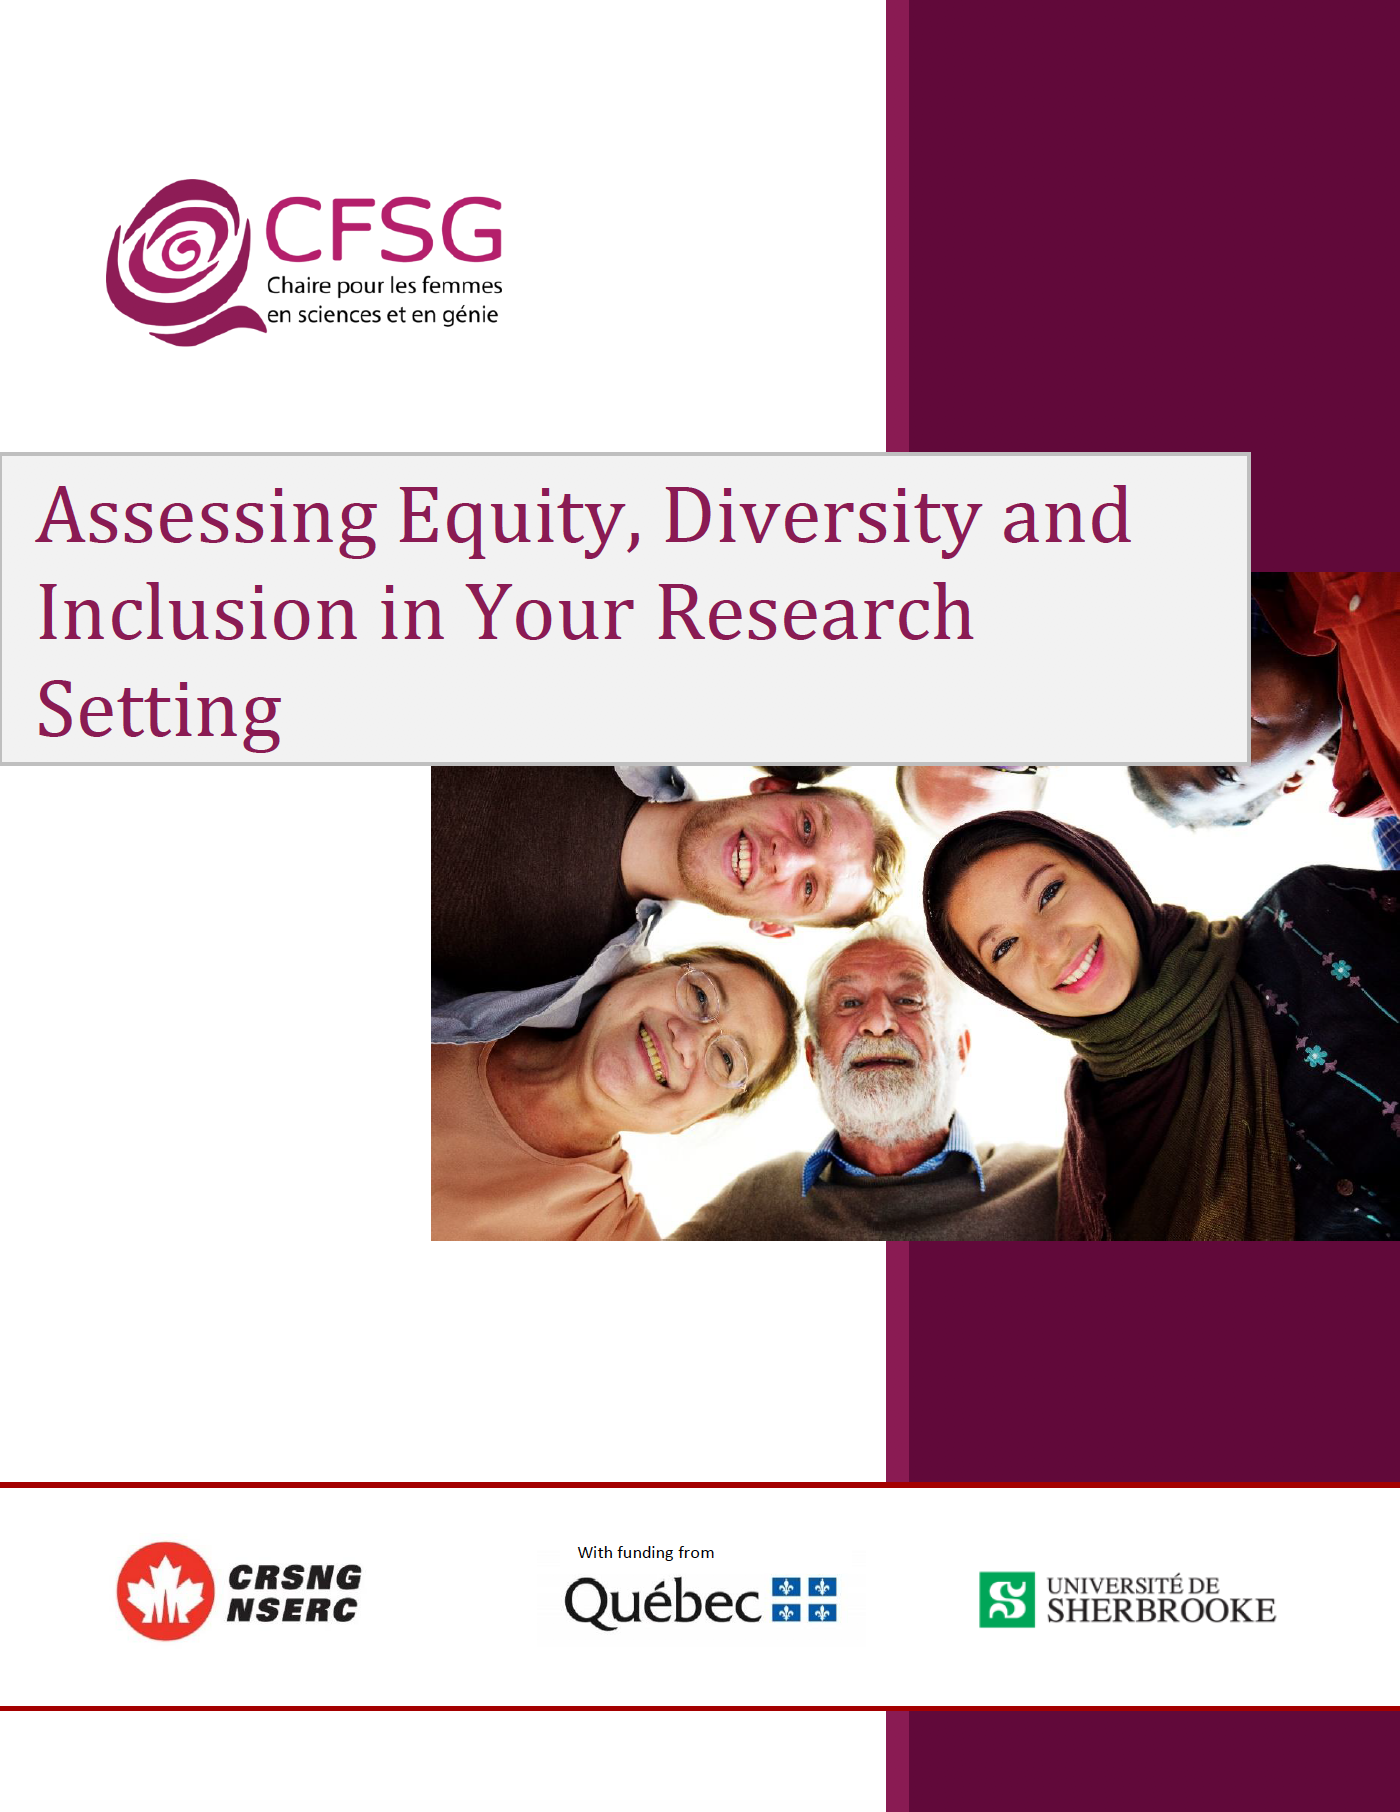 Assessing Equity, Diversity and Inclusion in Your Research Setting